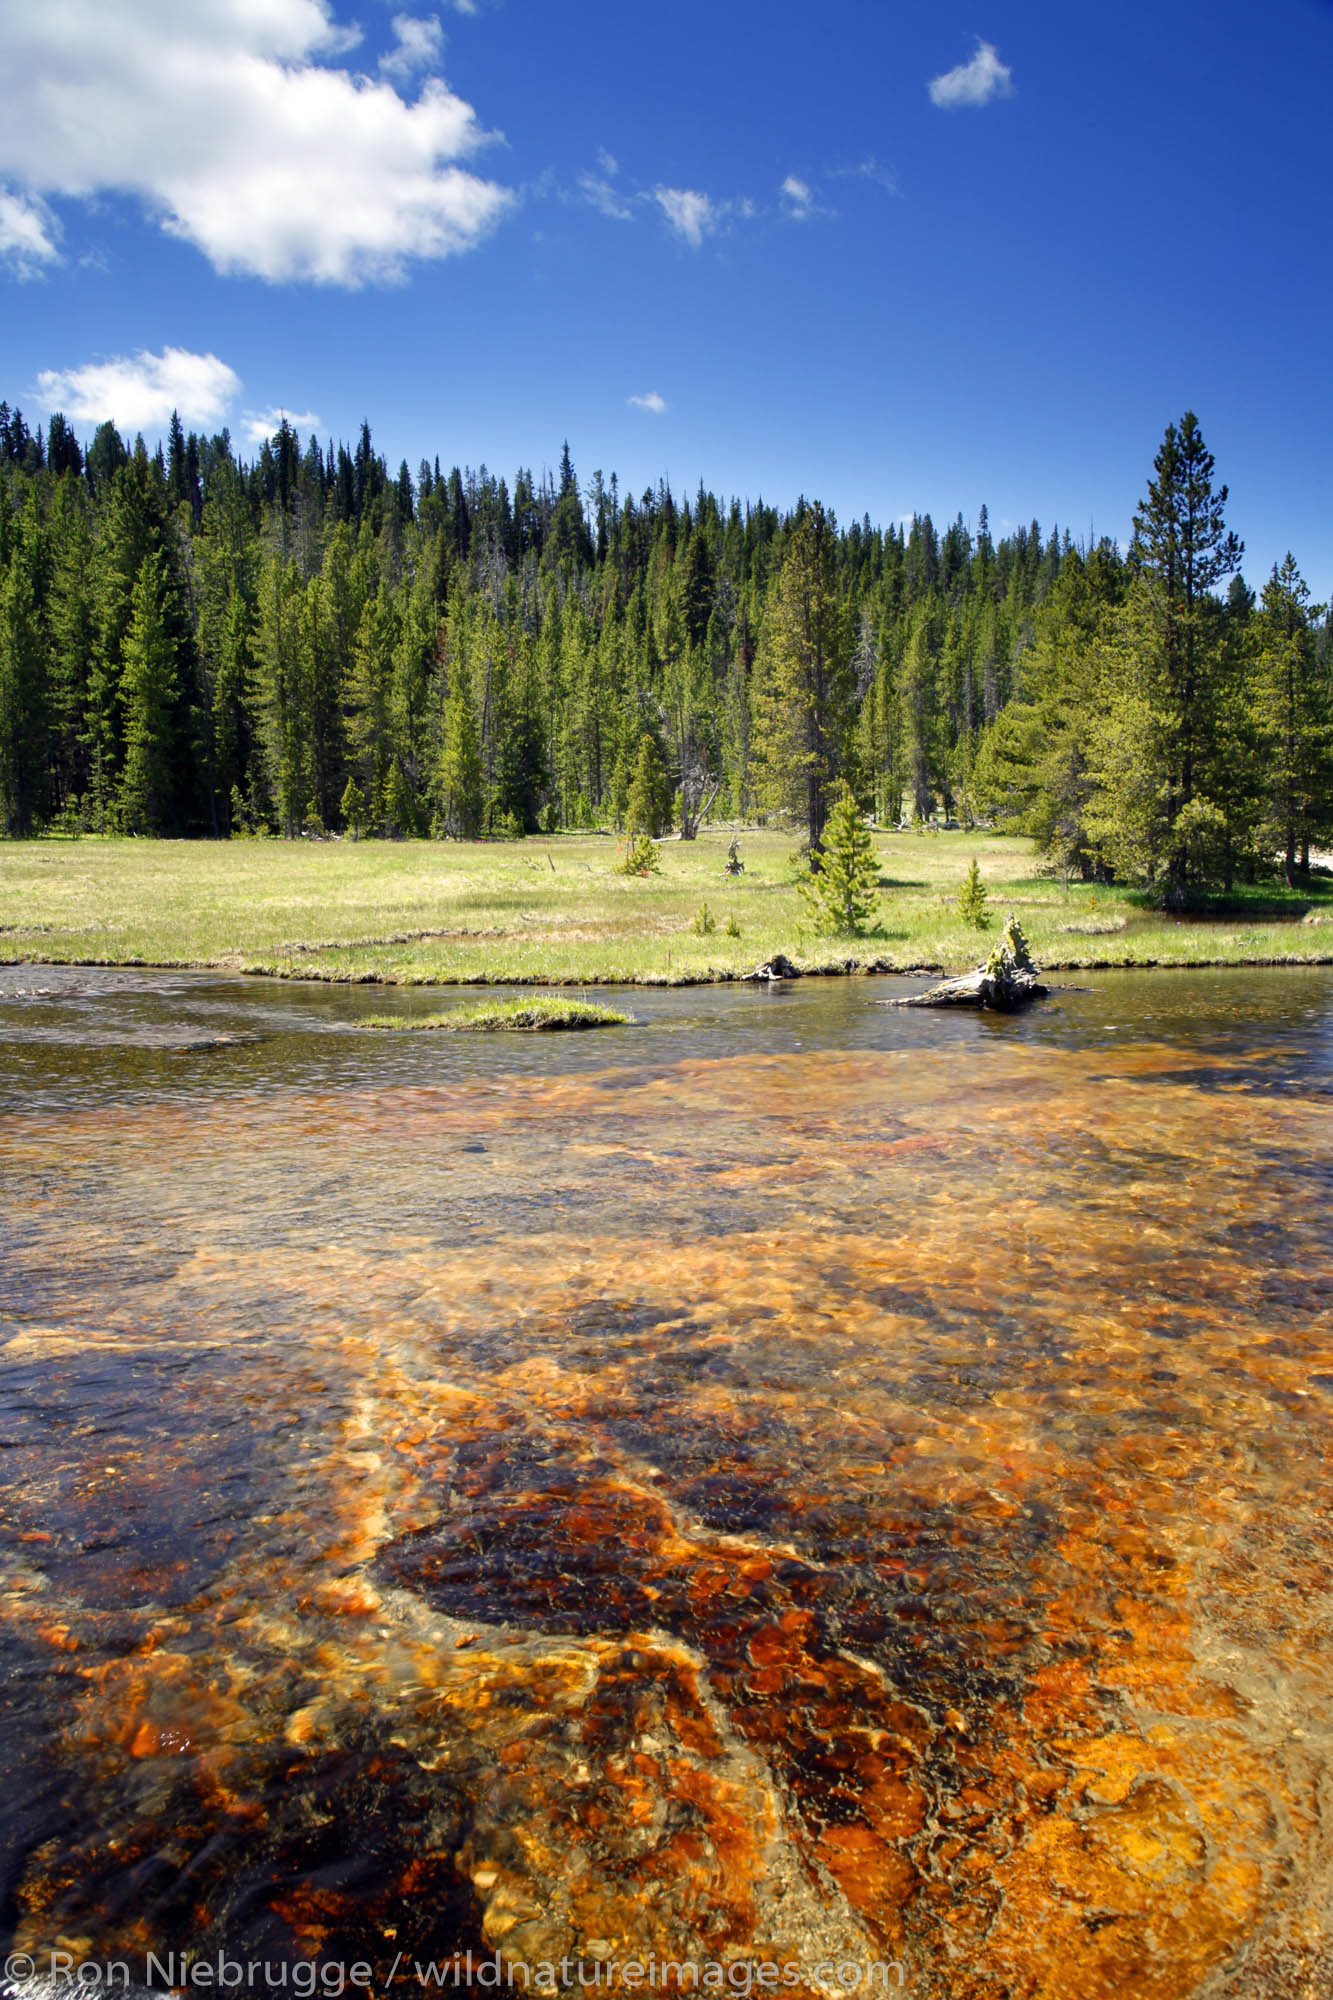 Firehole River, Yellowstone National Park, Wyoming.